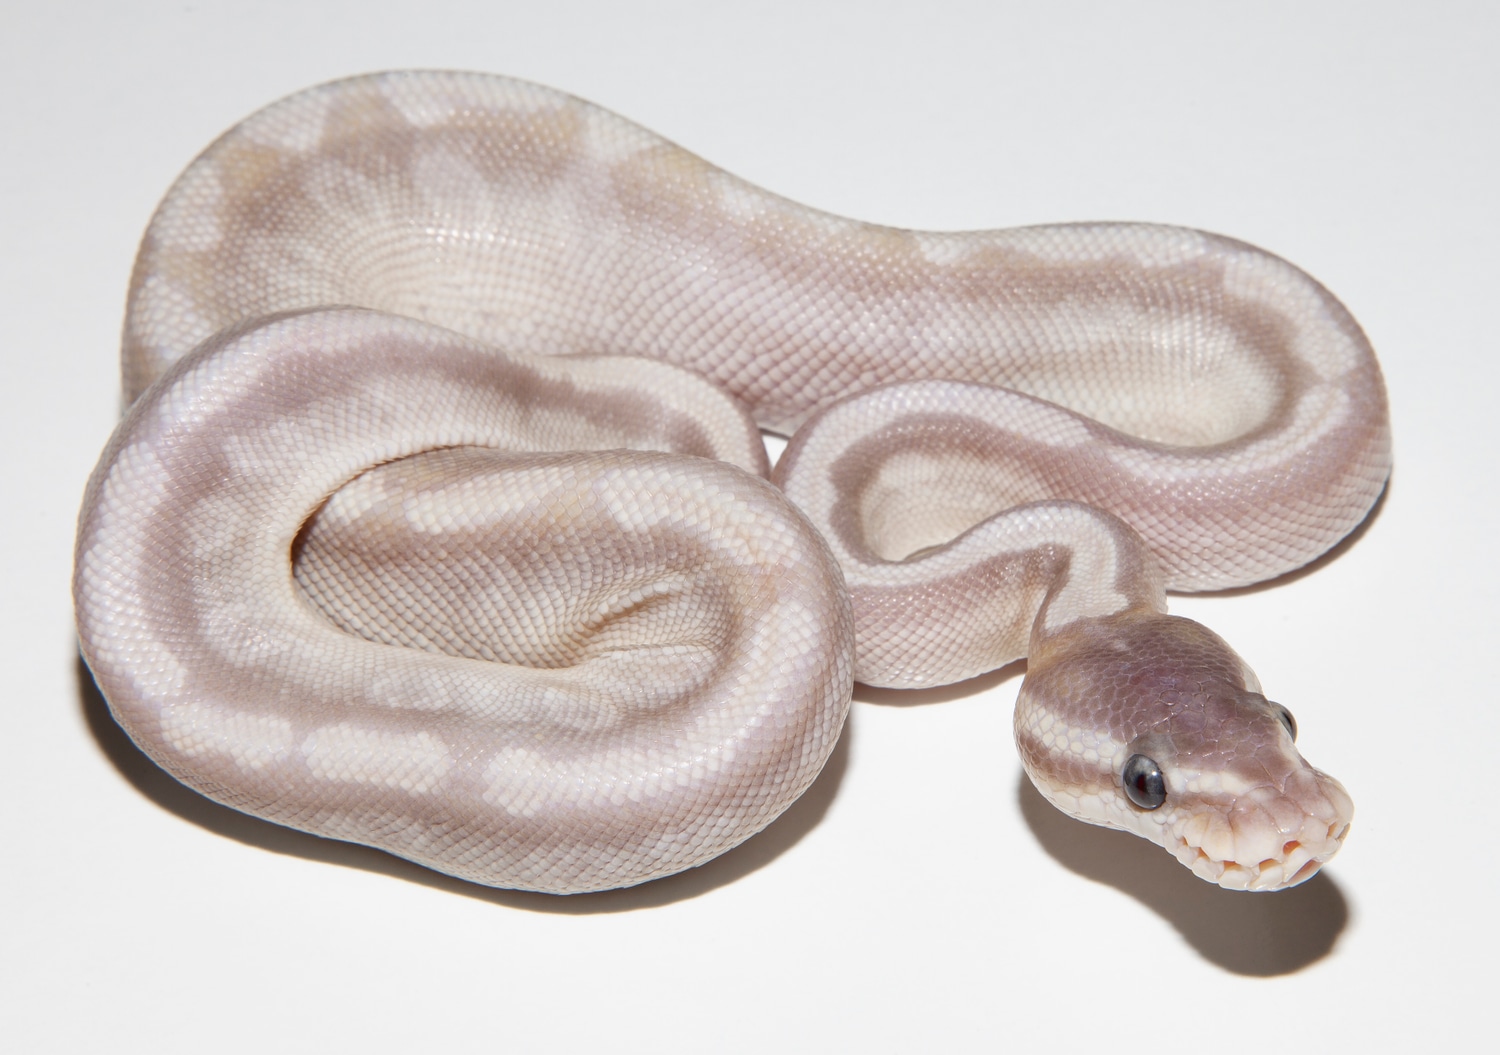 Mystic Potion GHI X Pastel Special GHI Ball Python by GHI Reptiles